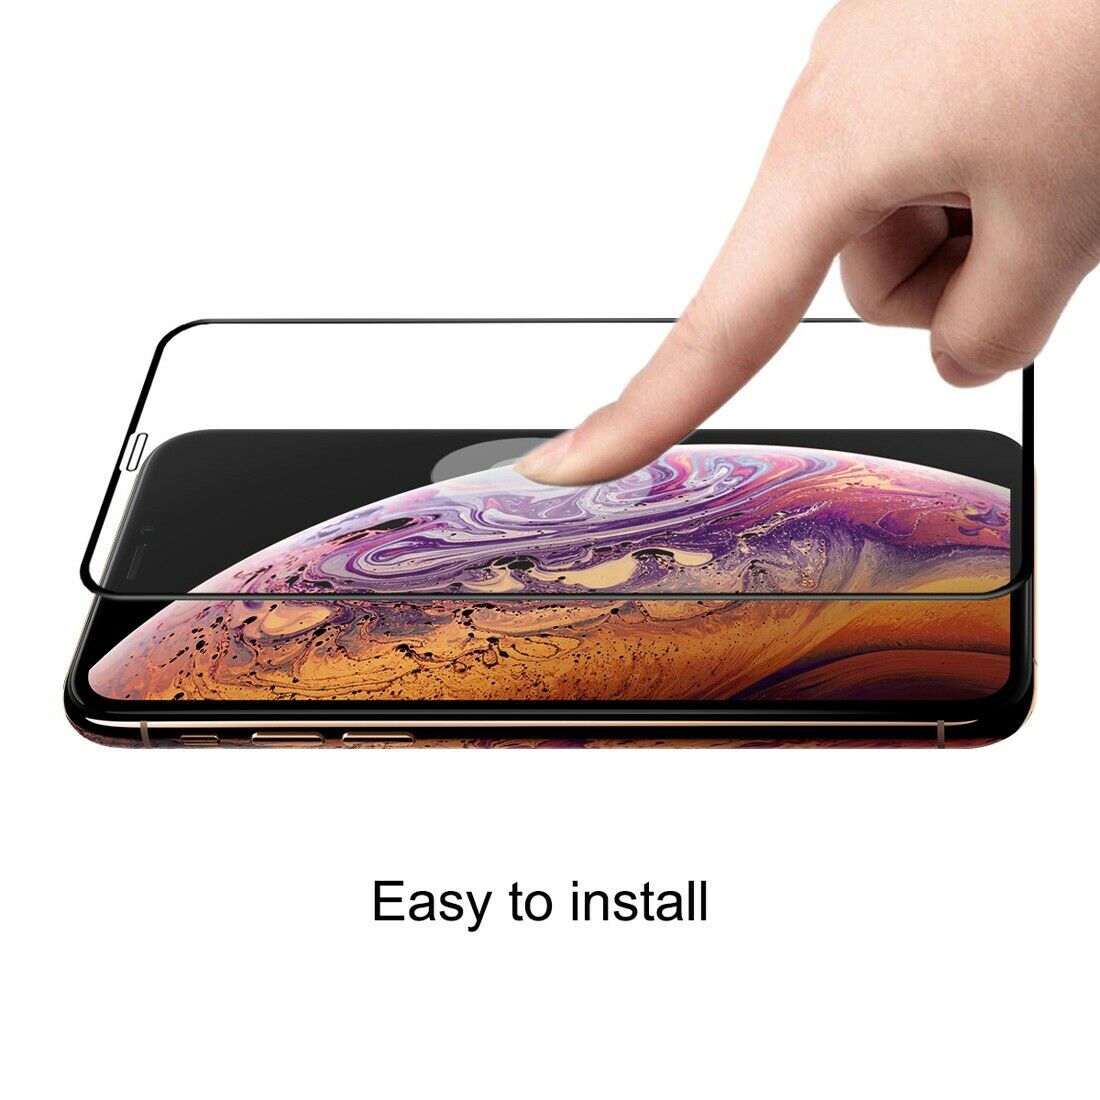 Apple iPhone 11 Pro 9D Full Coverage Tempered Glass for [product_price] - First Help Tech